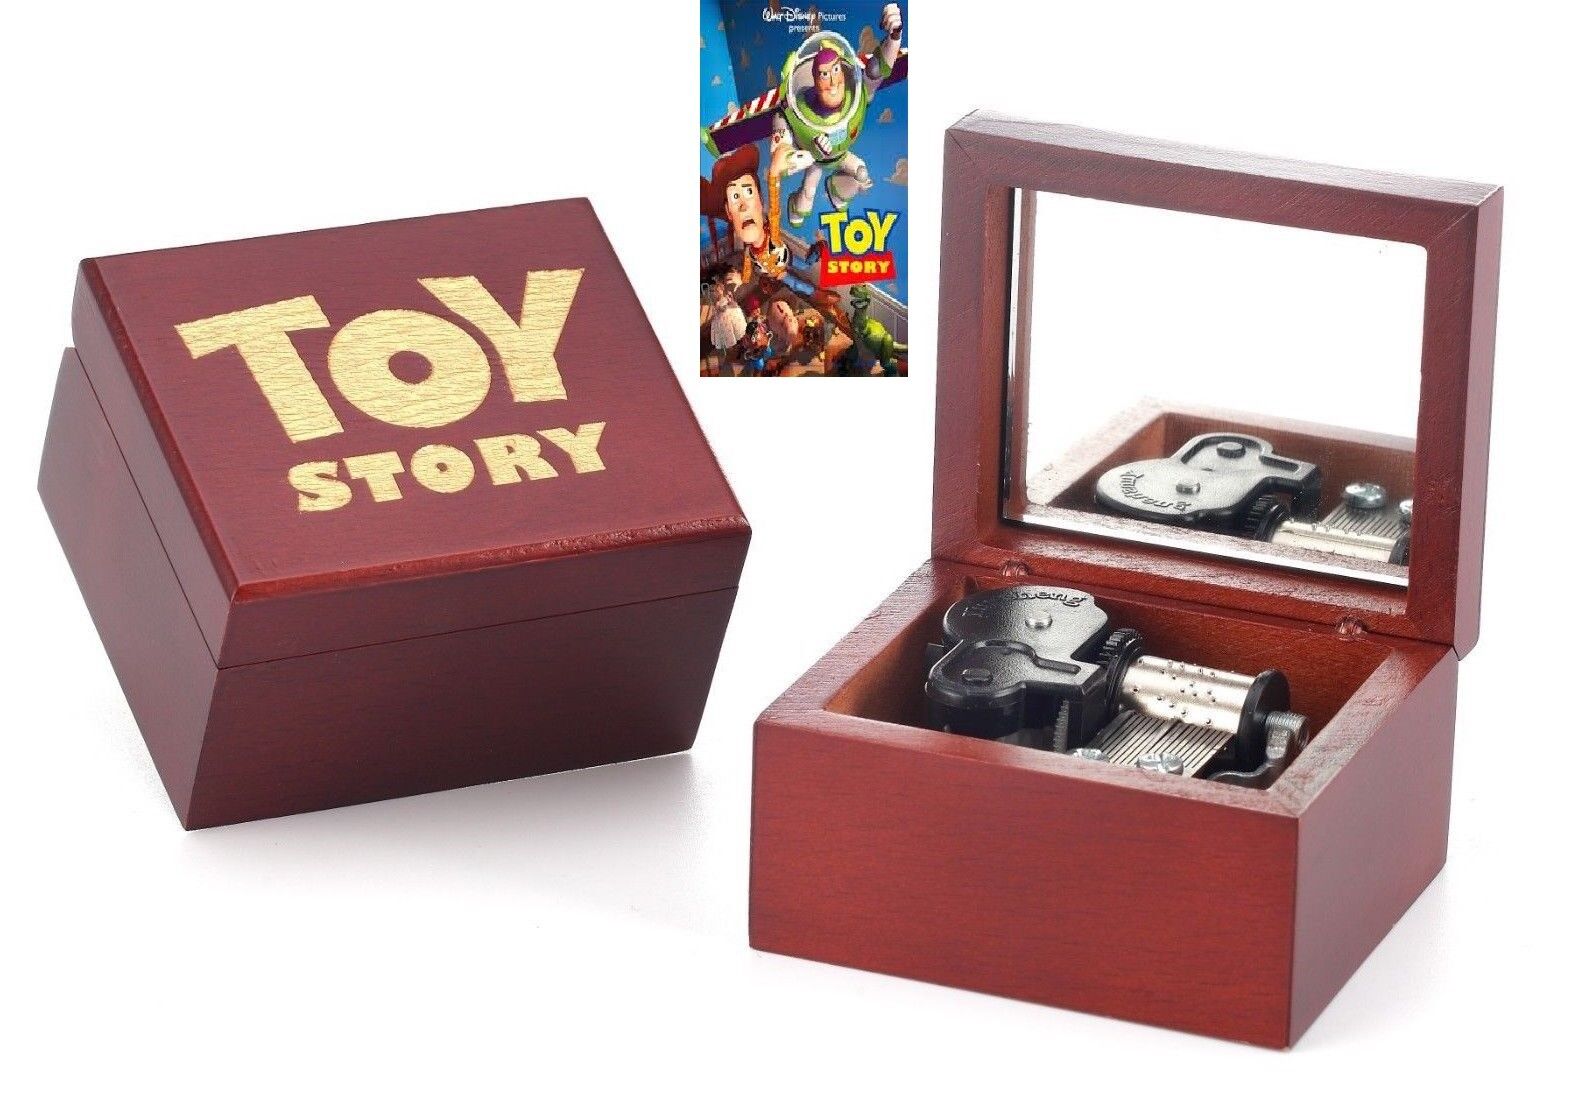 JAPAN SANKYO ( TOY STORY ) WIND UP MUSIC BOX: YOU'VE GOT A FRIEND IN ME